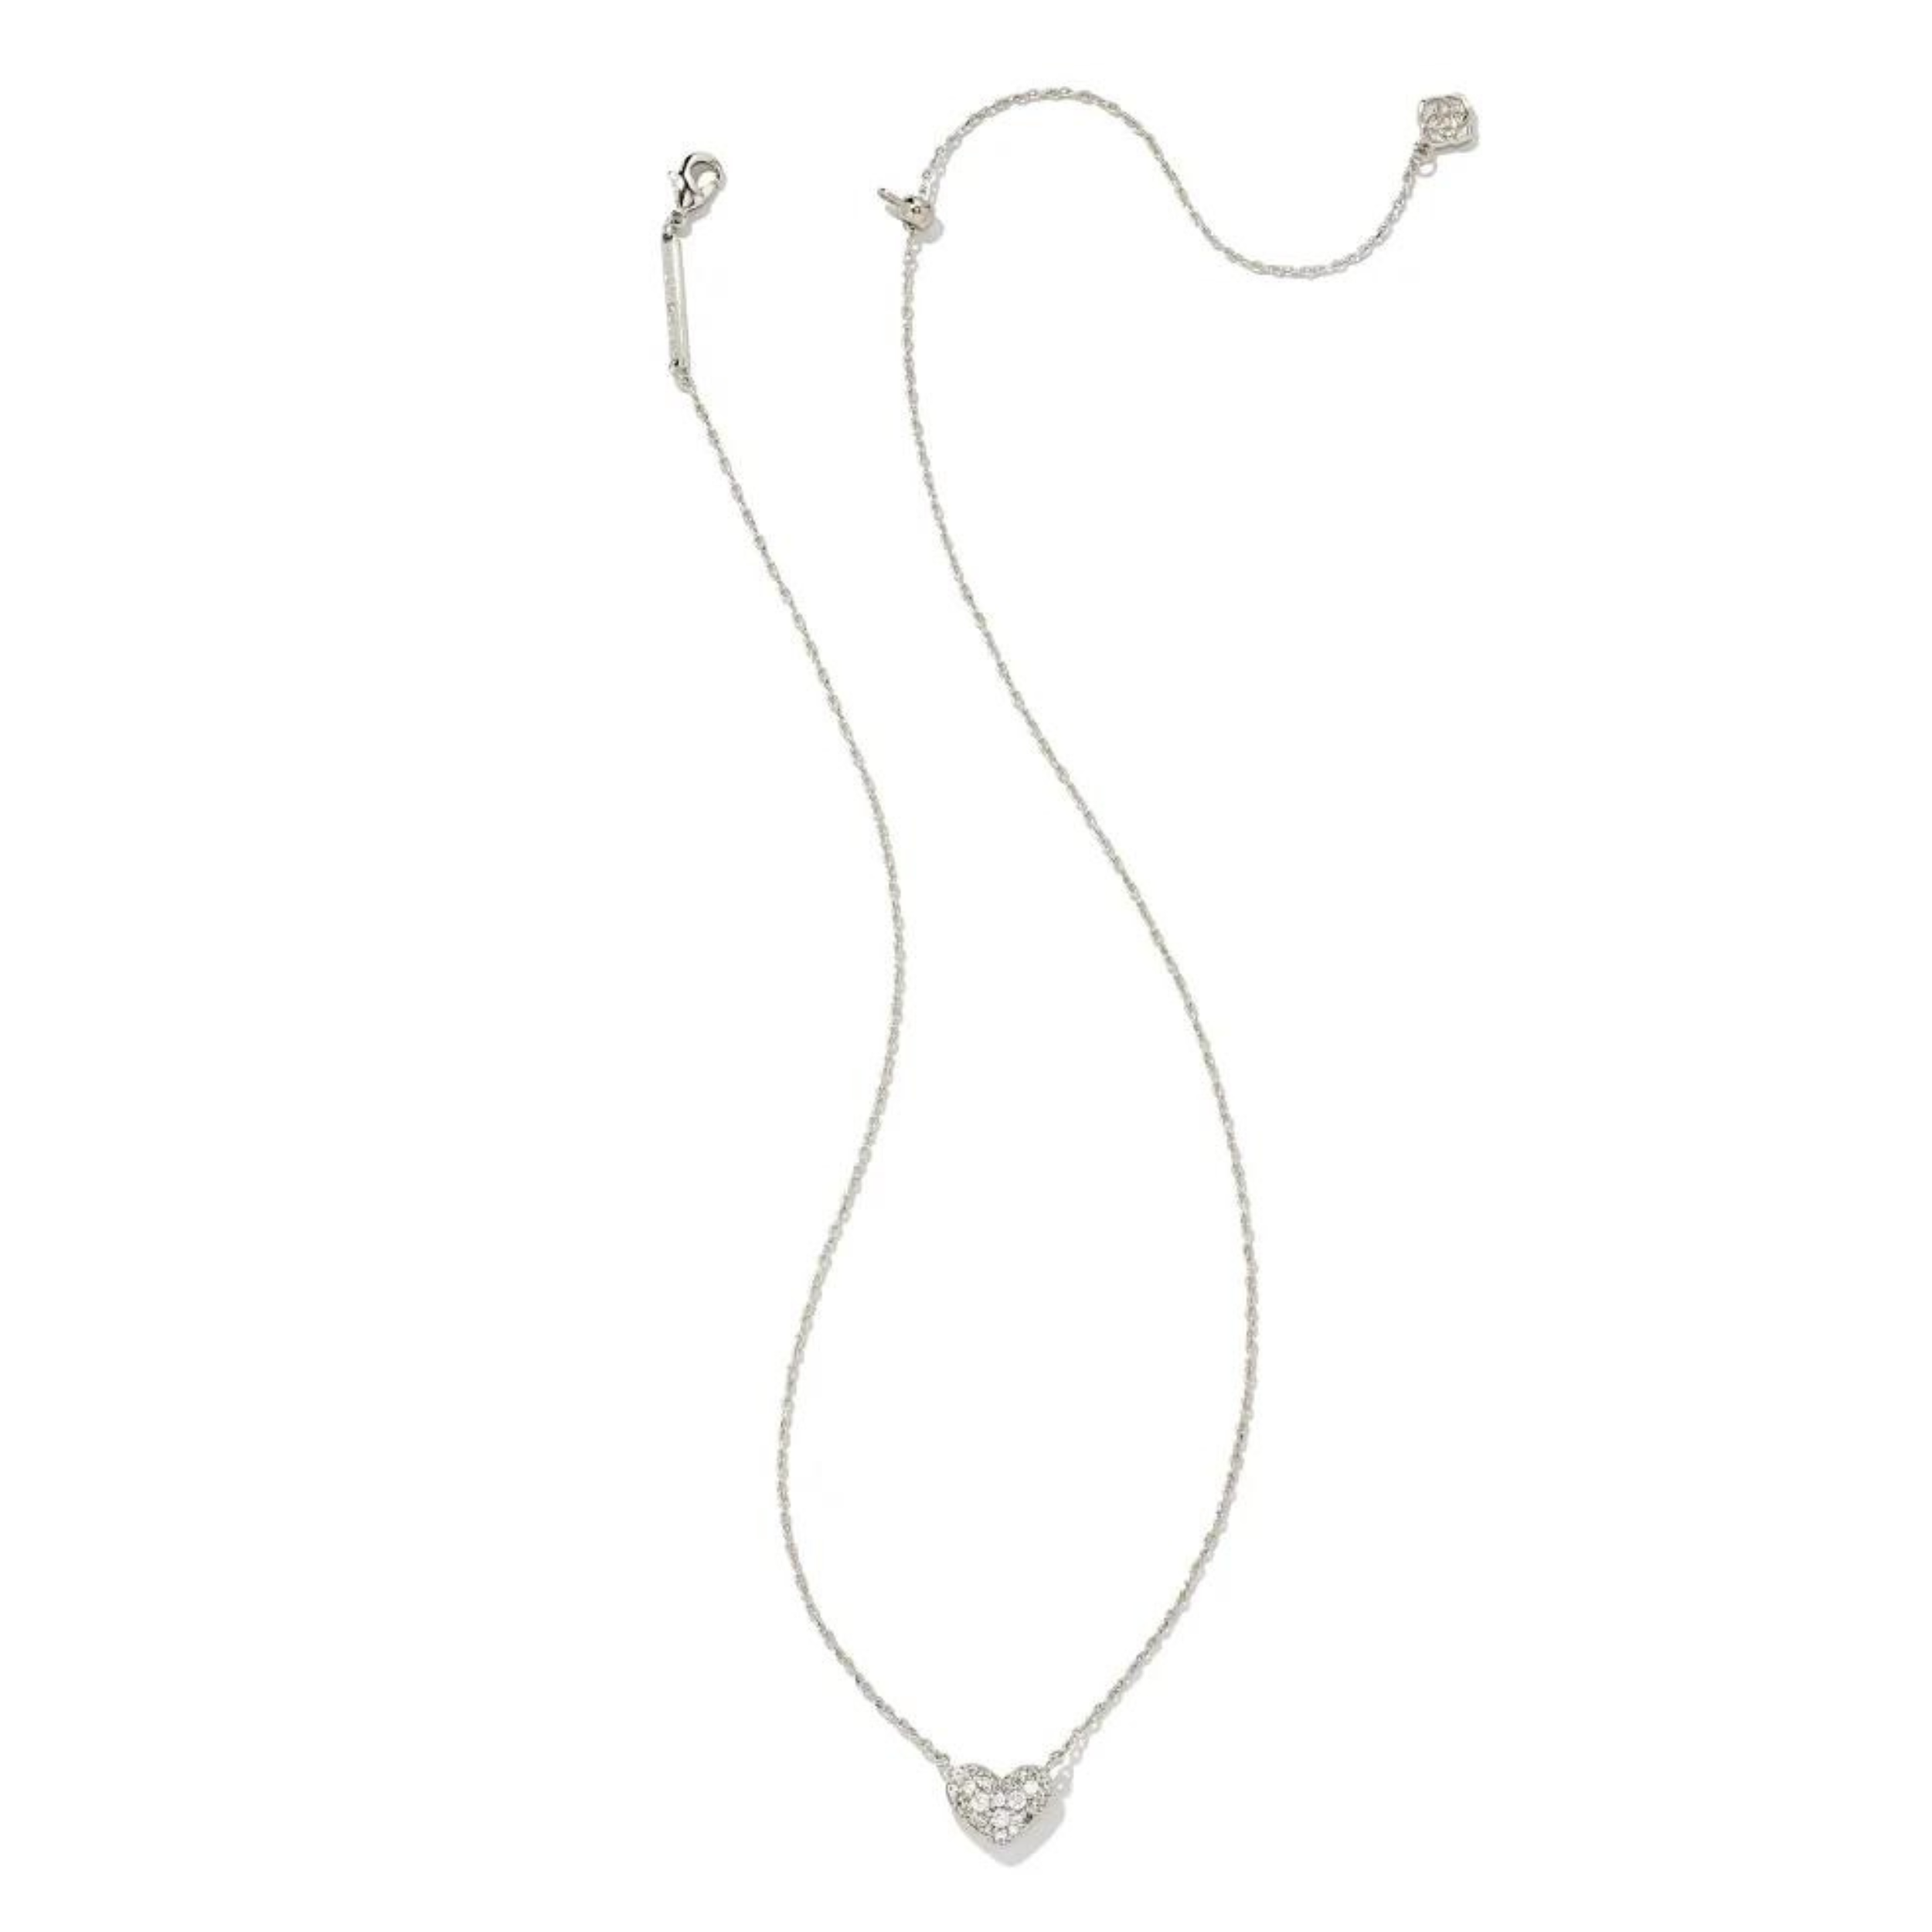 Kendra Scott | Ari Silver Pave Crystal Heart Necklace in White Crystal - Giddy Up Glamour Boutique